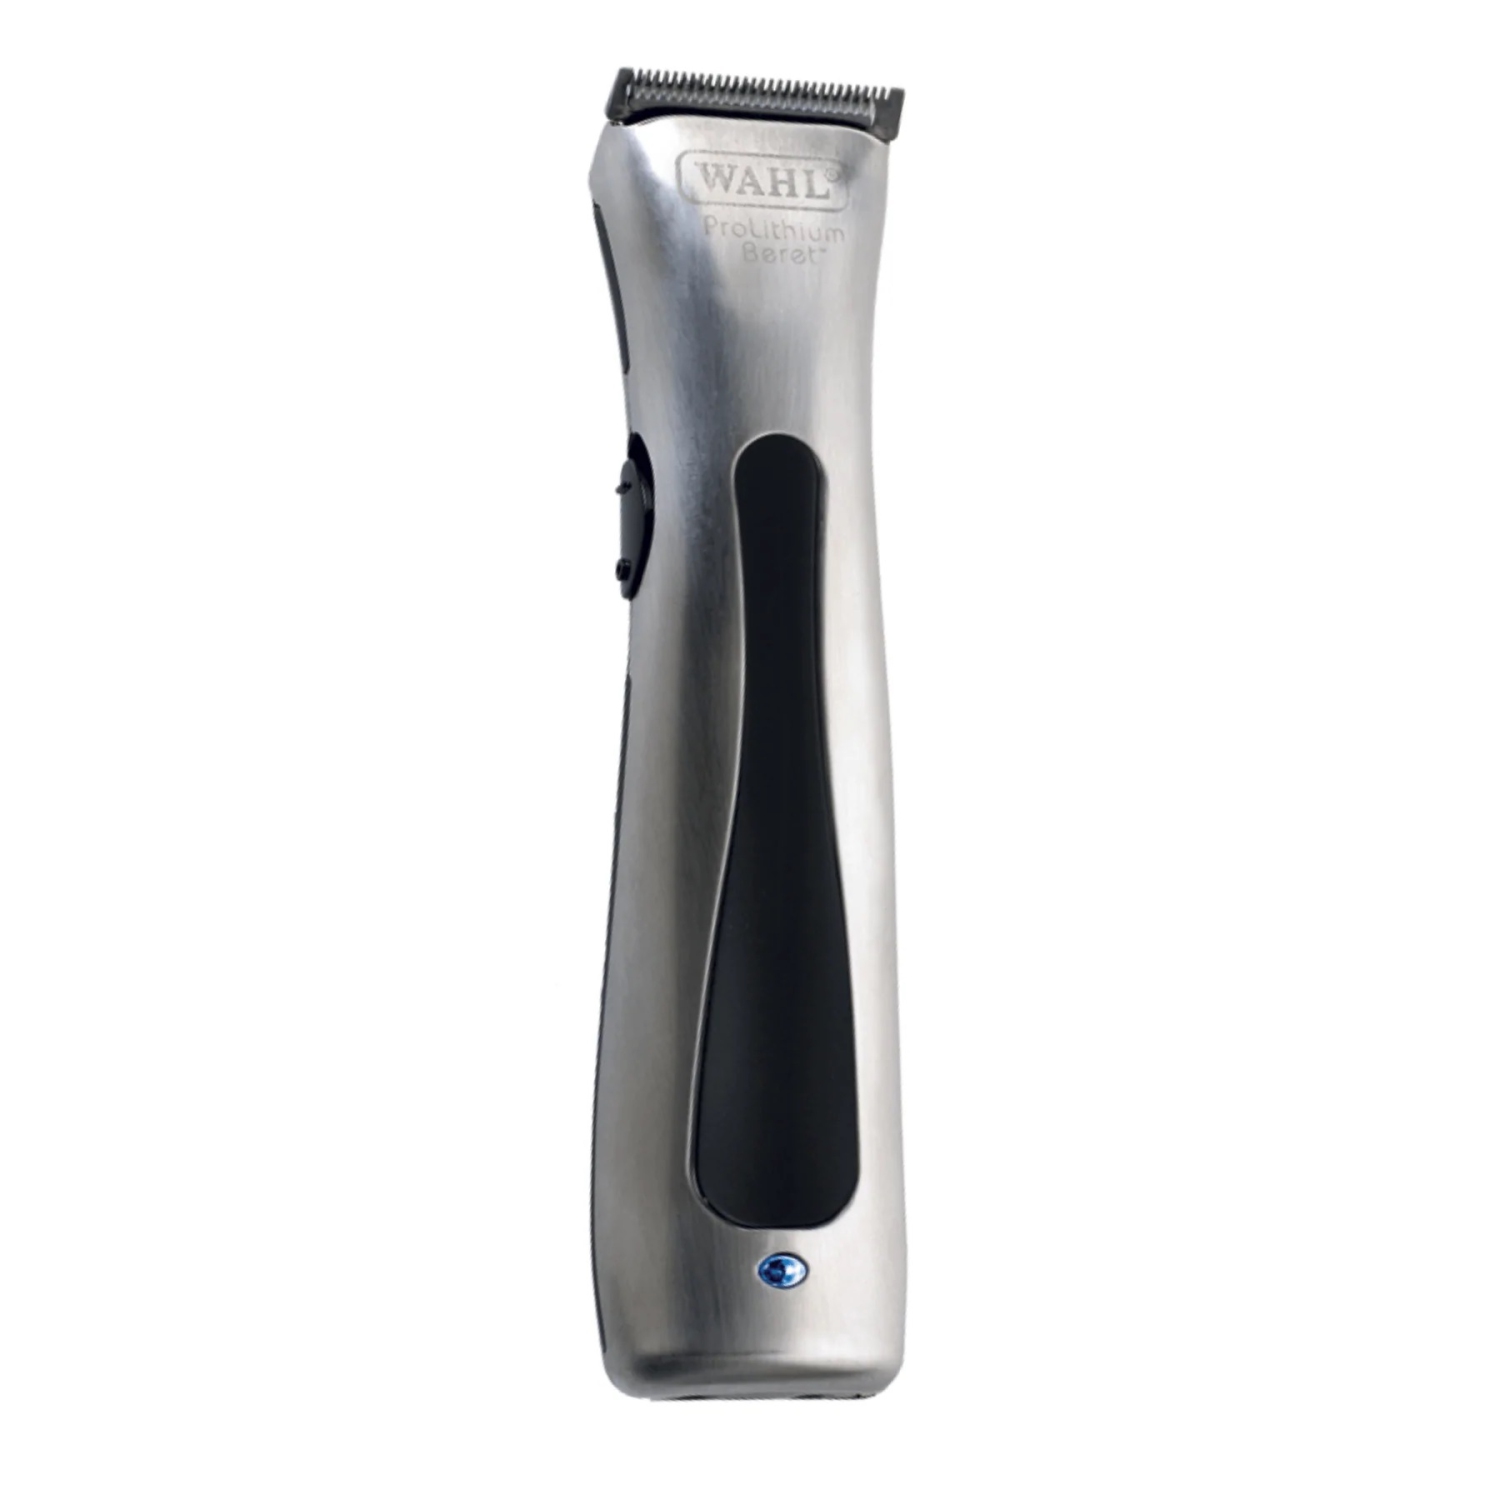 Wahl Professional Lithium Ion Cordless Beret Hair Trimmer #56308